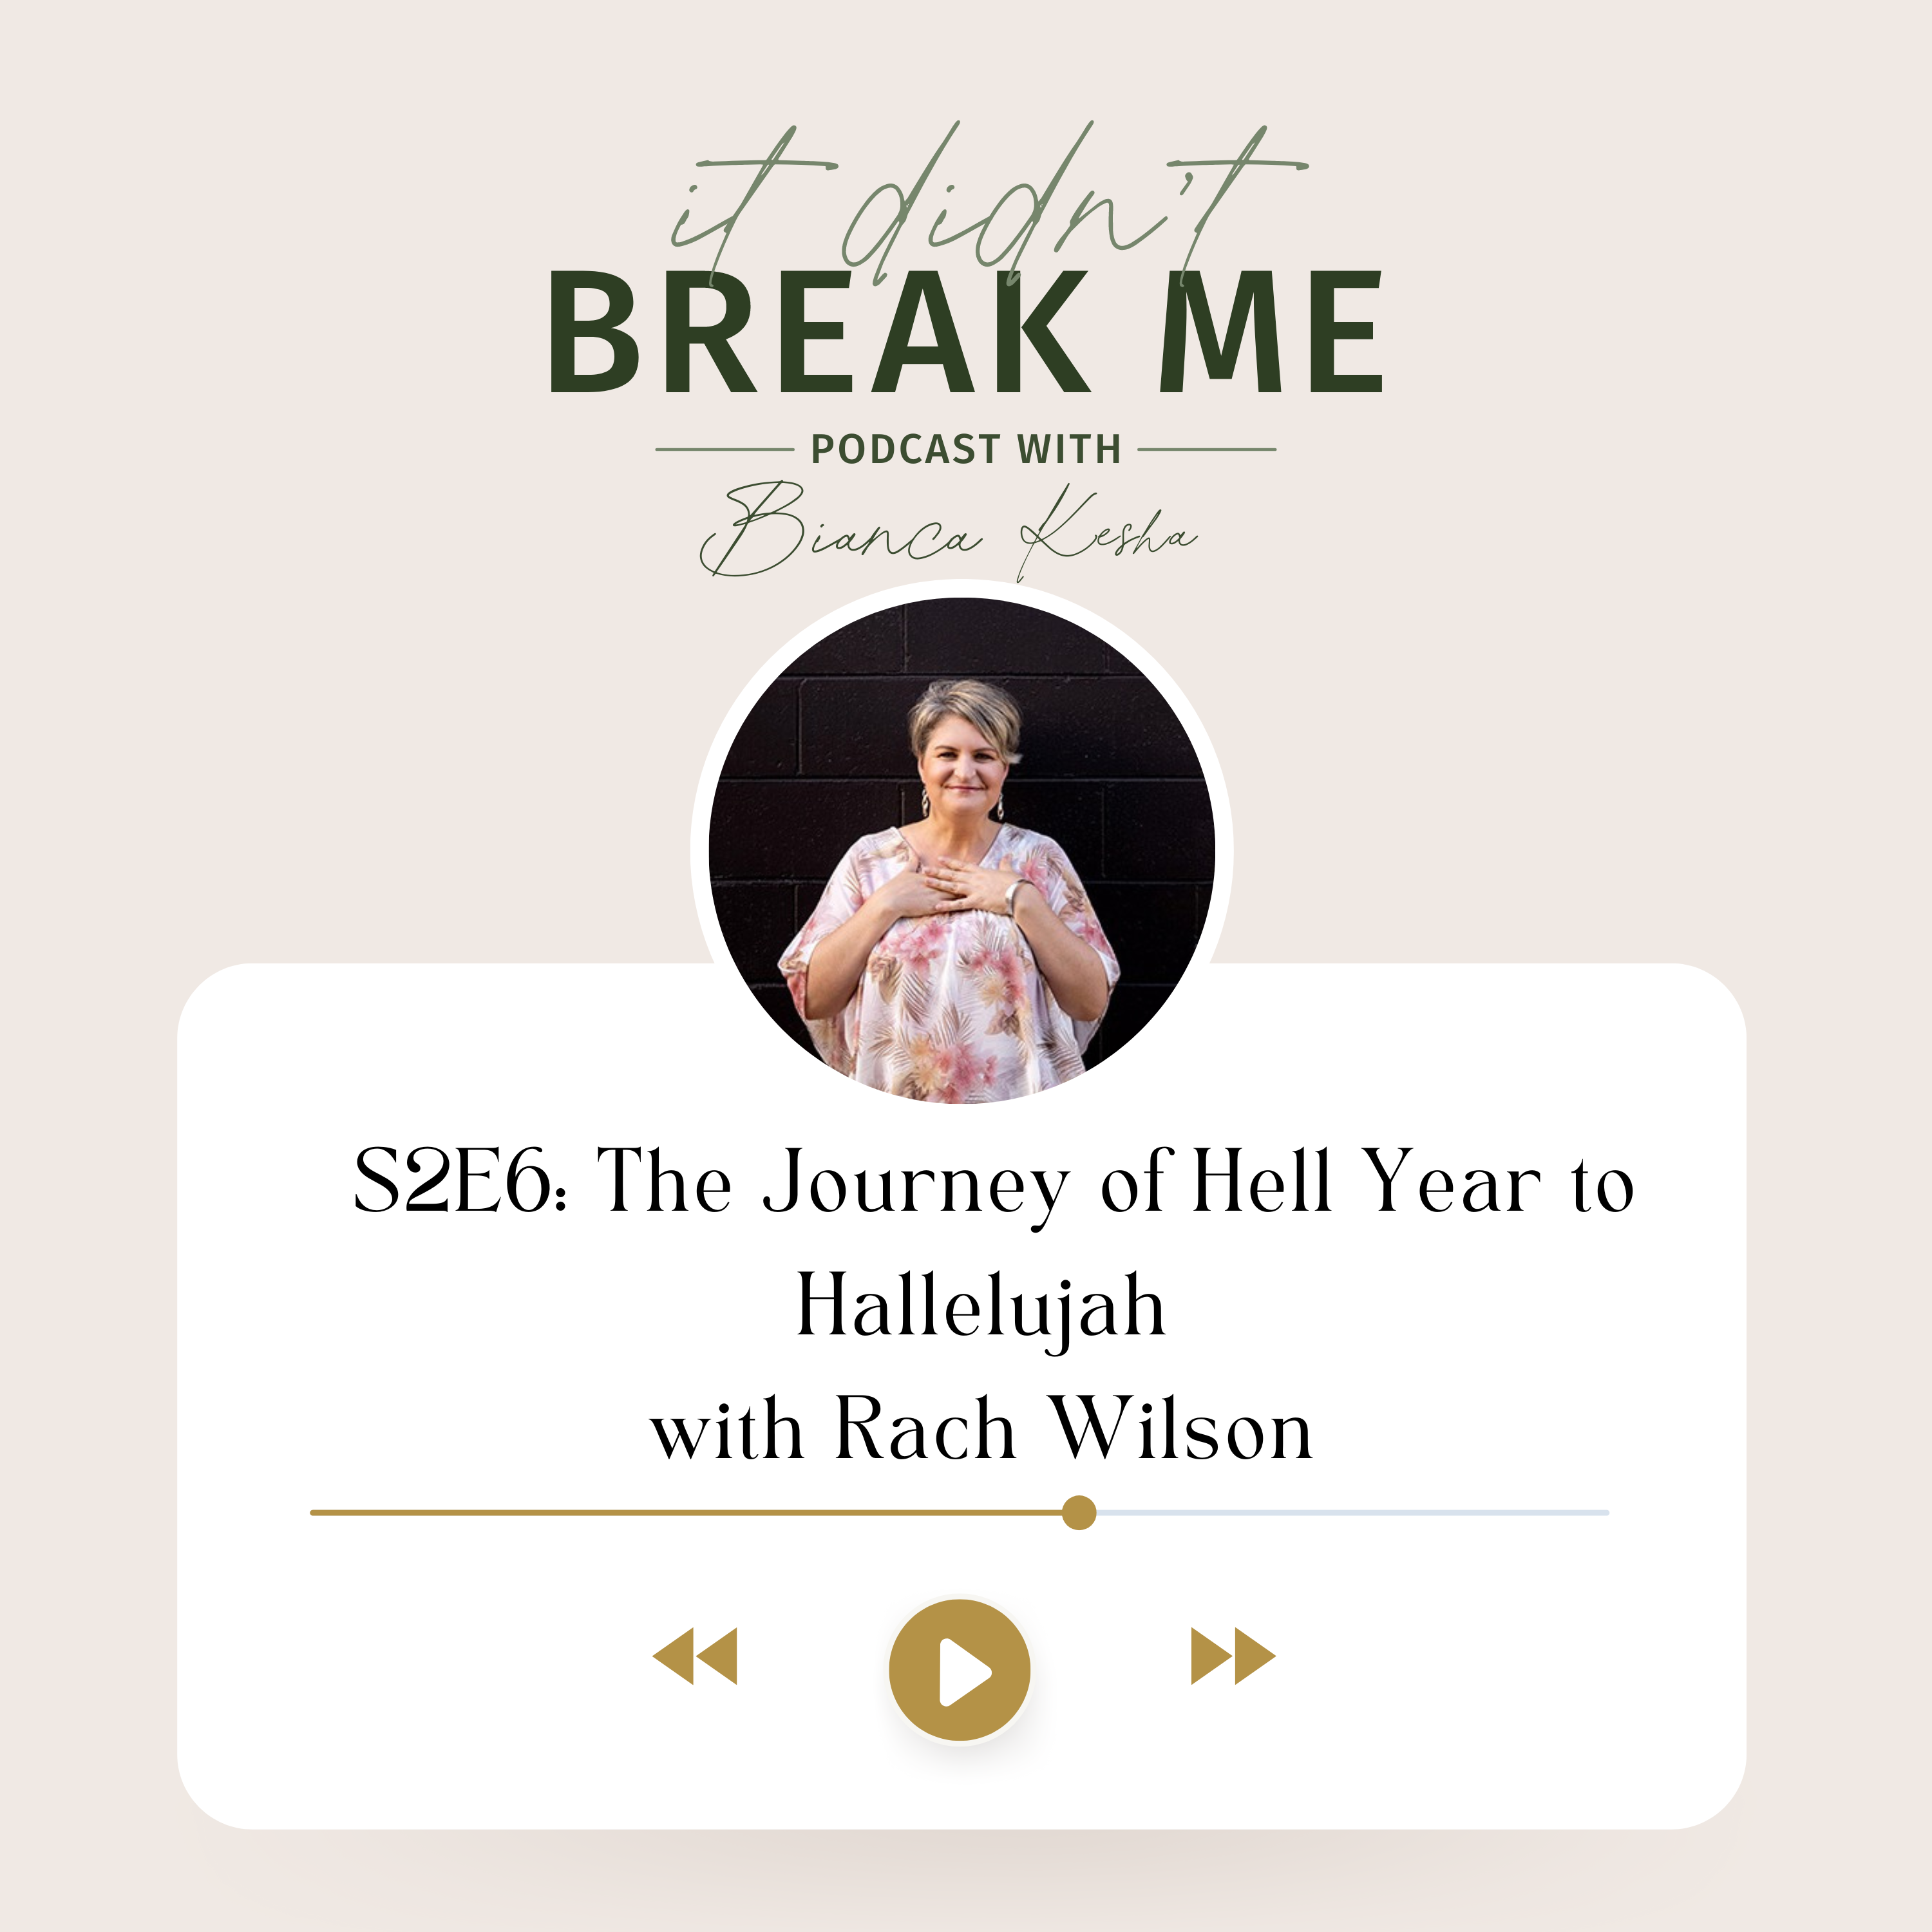 The Journey of Hell Year to Hallelujah with Rach Wilson